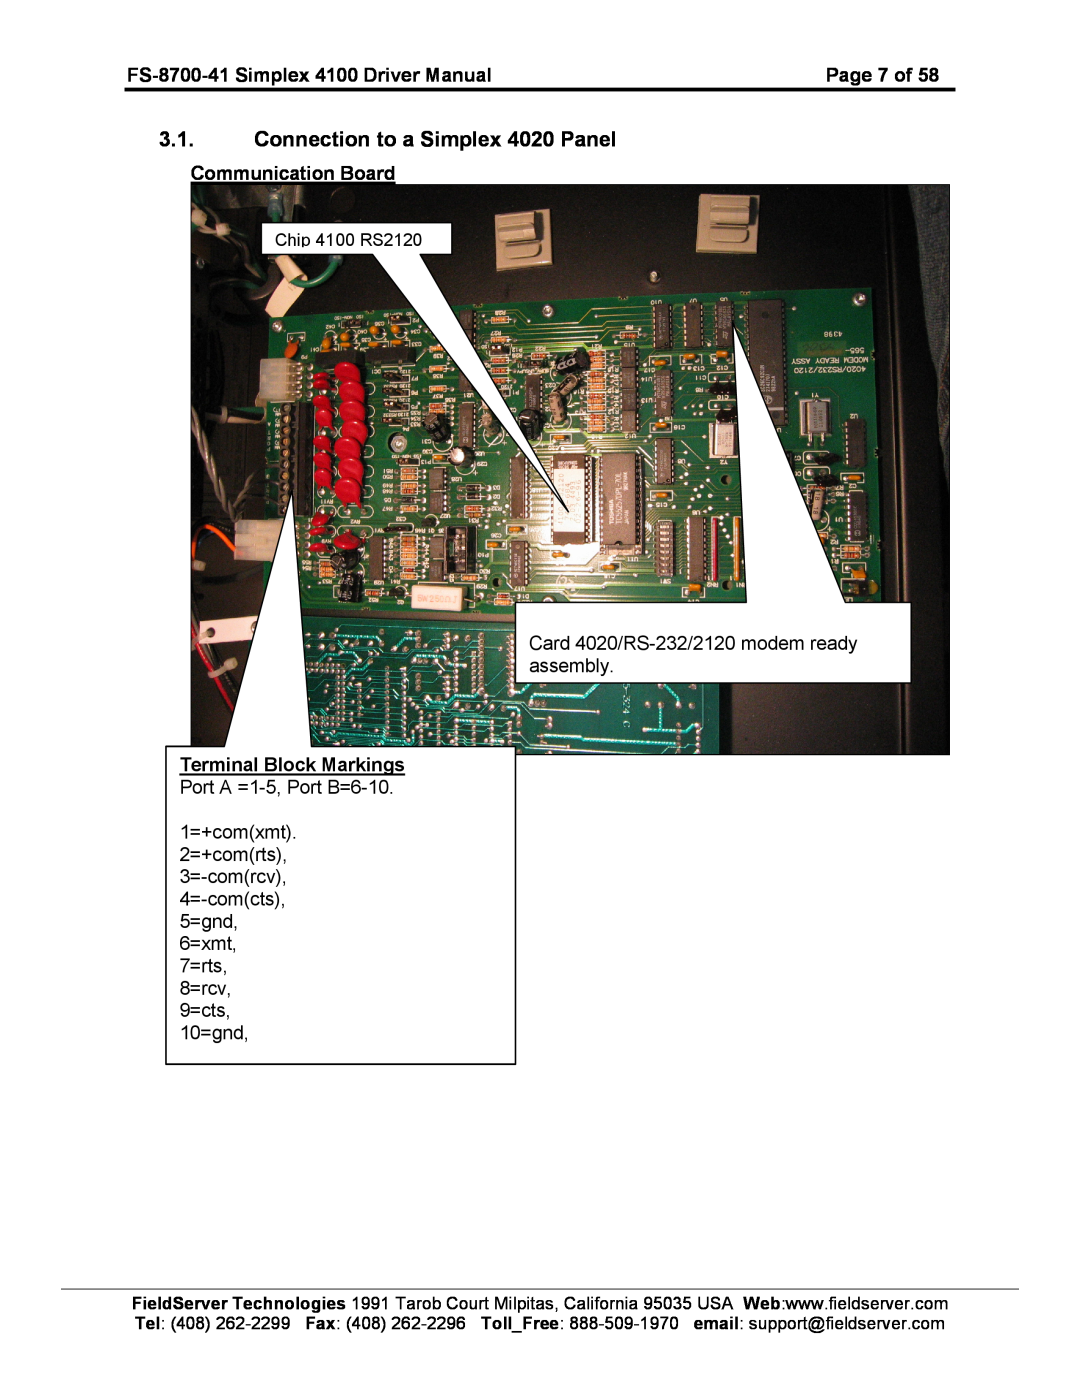 FieldServer FS-8700-41 Connection to a Simplex 4020 Panel, Card4020/RS232/2120modemready, Chip4100 RS2120, Tel4082622299 